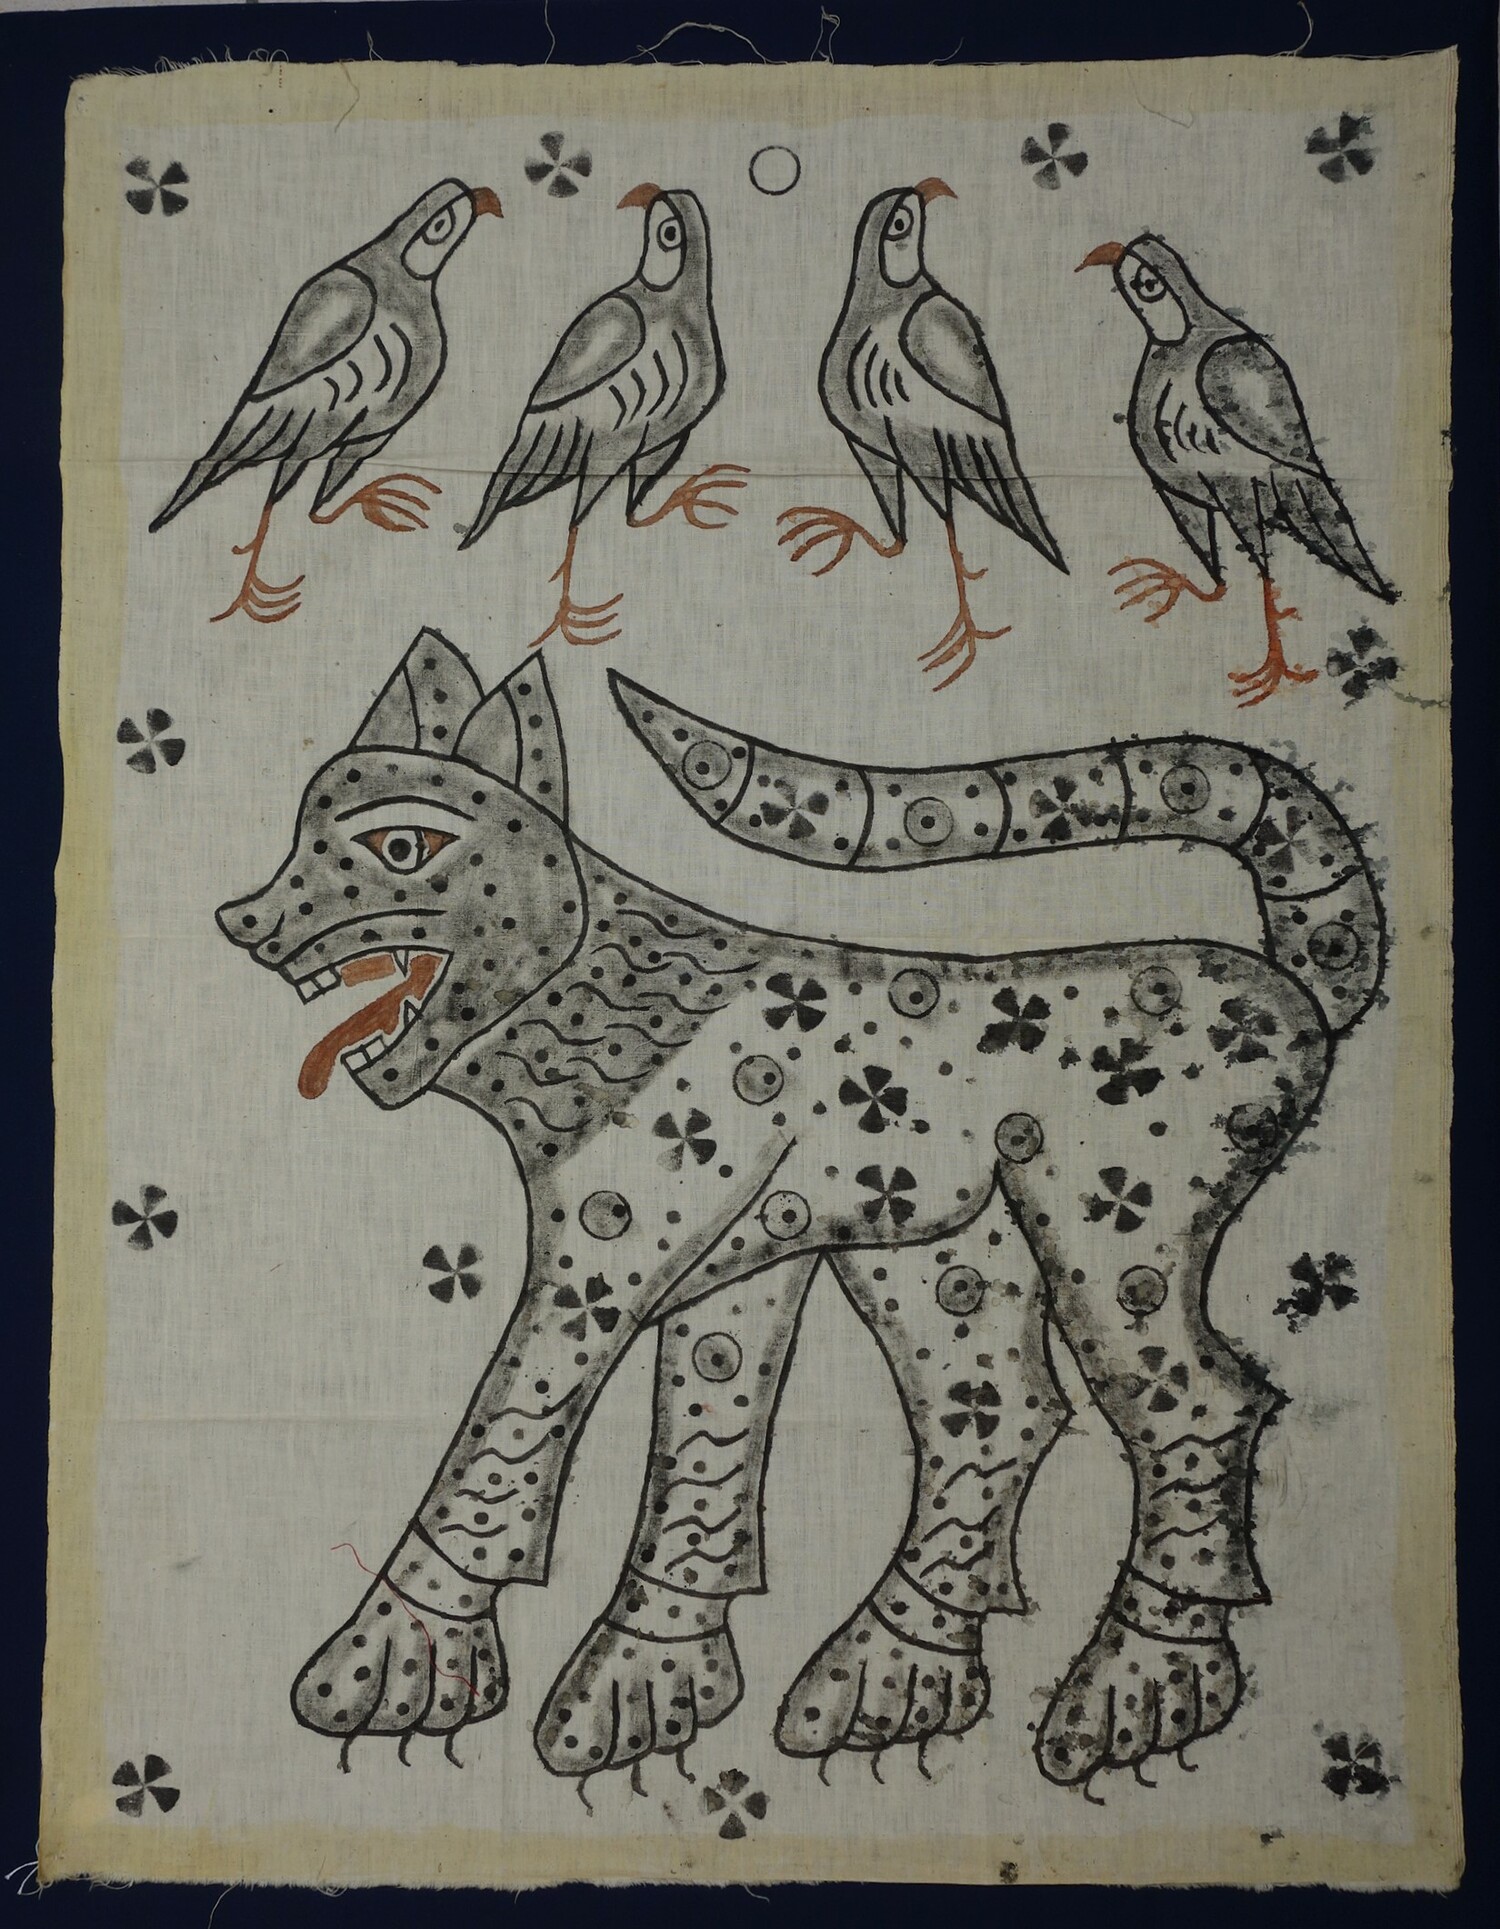 Hunting cloth from eastern Afghanistan, 1960s (TRC 2016.1773).